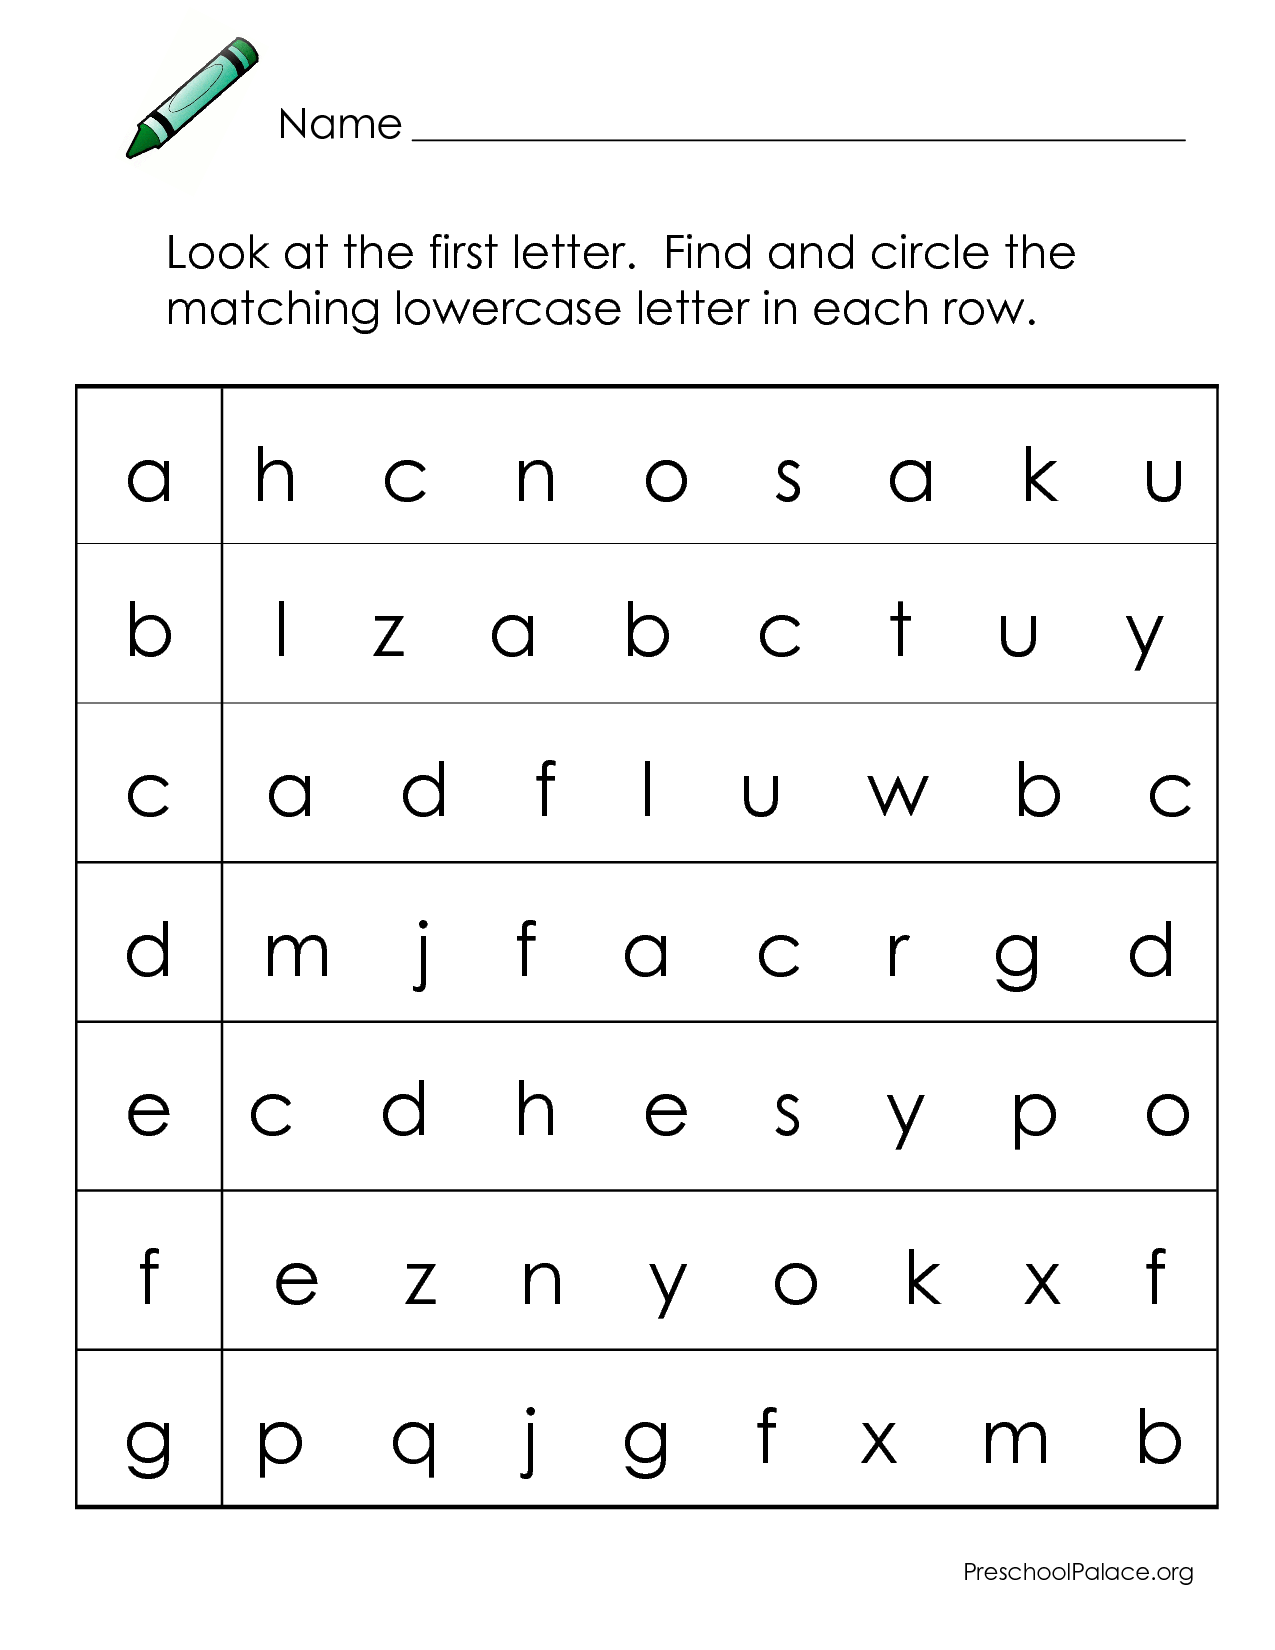 14 Best Images of Lowercase A Worksheet - Handwriting Letter Practice